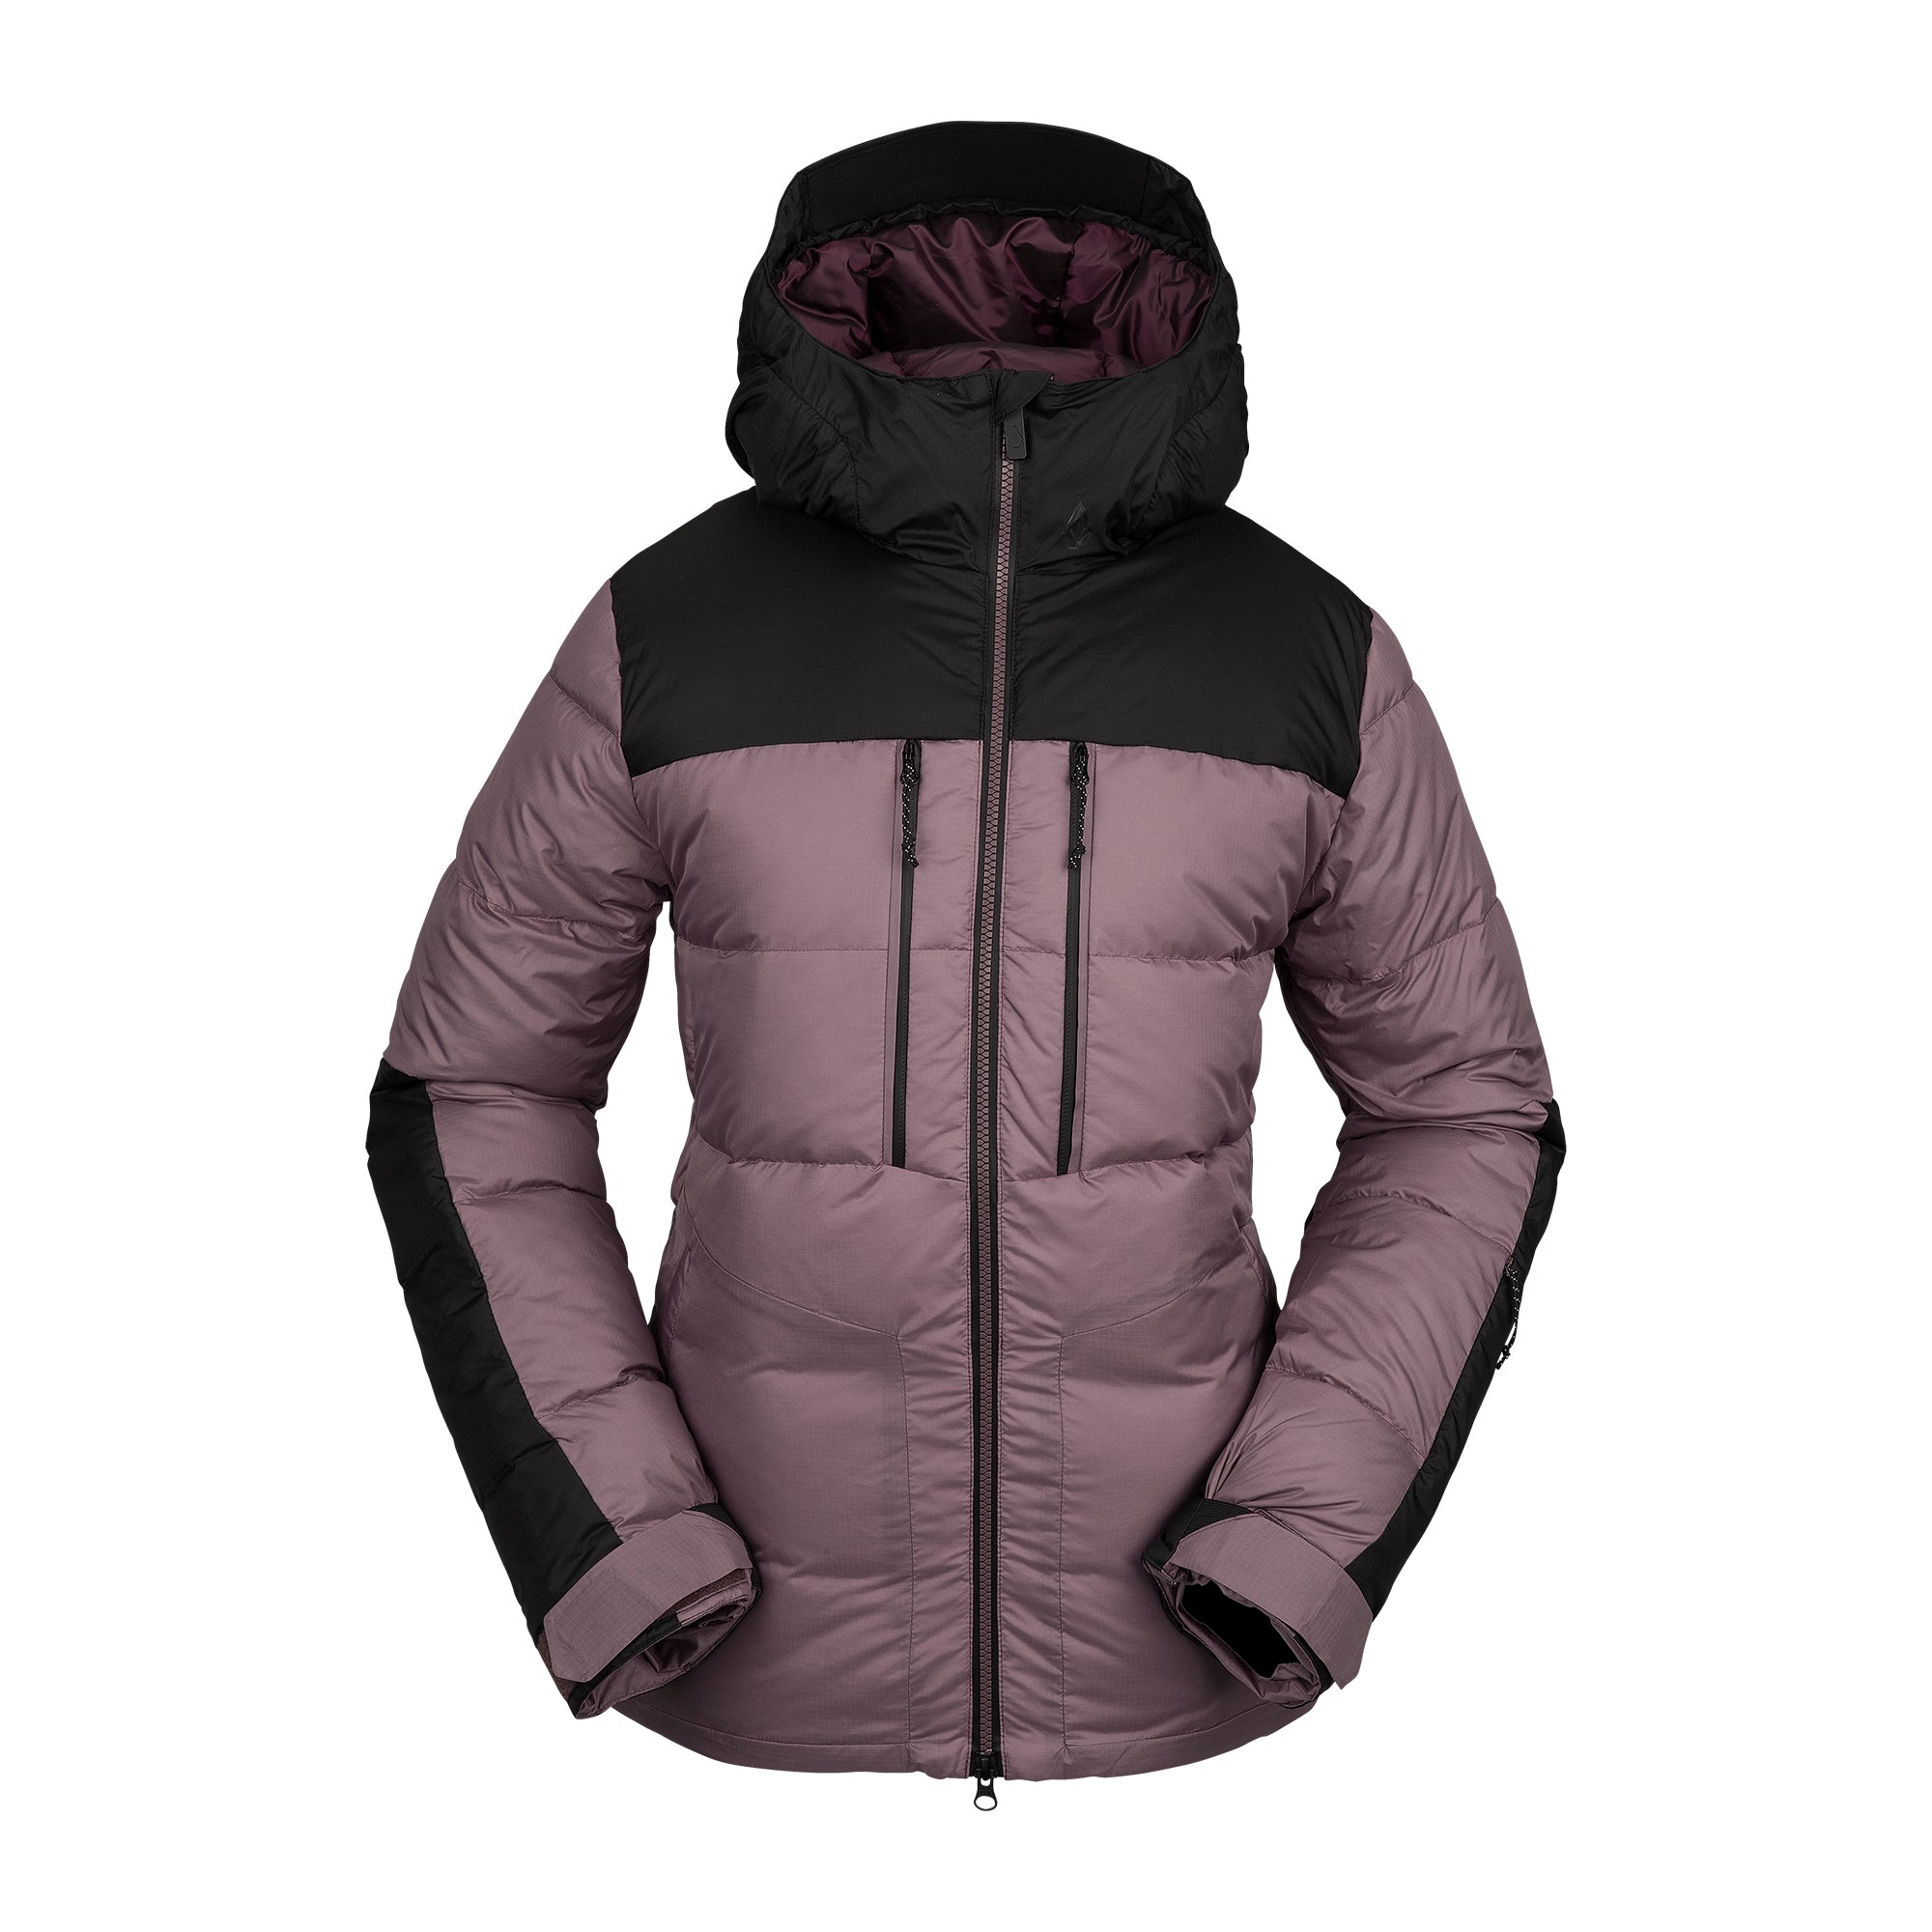 WOMEN'S LIFTED DOWN JACKET